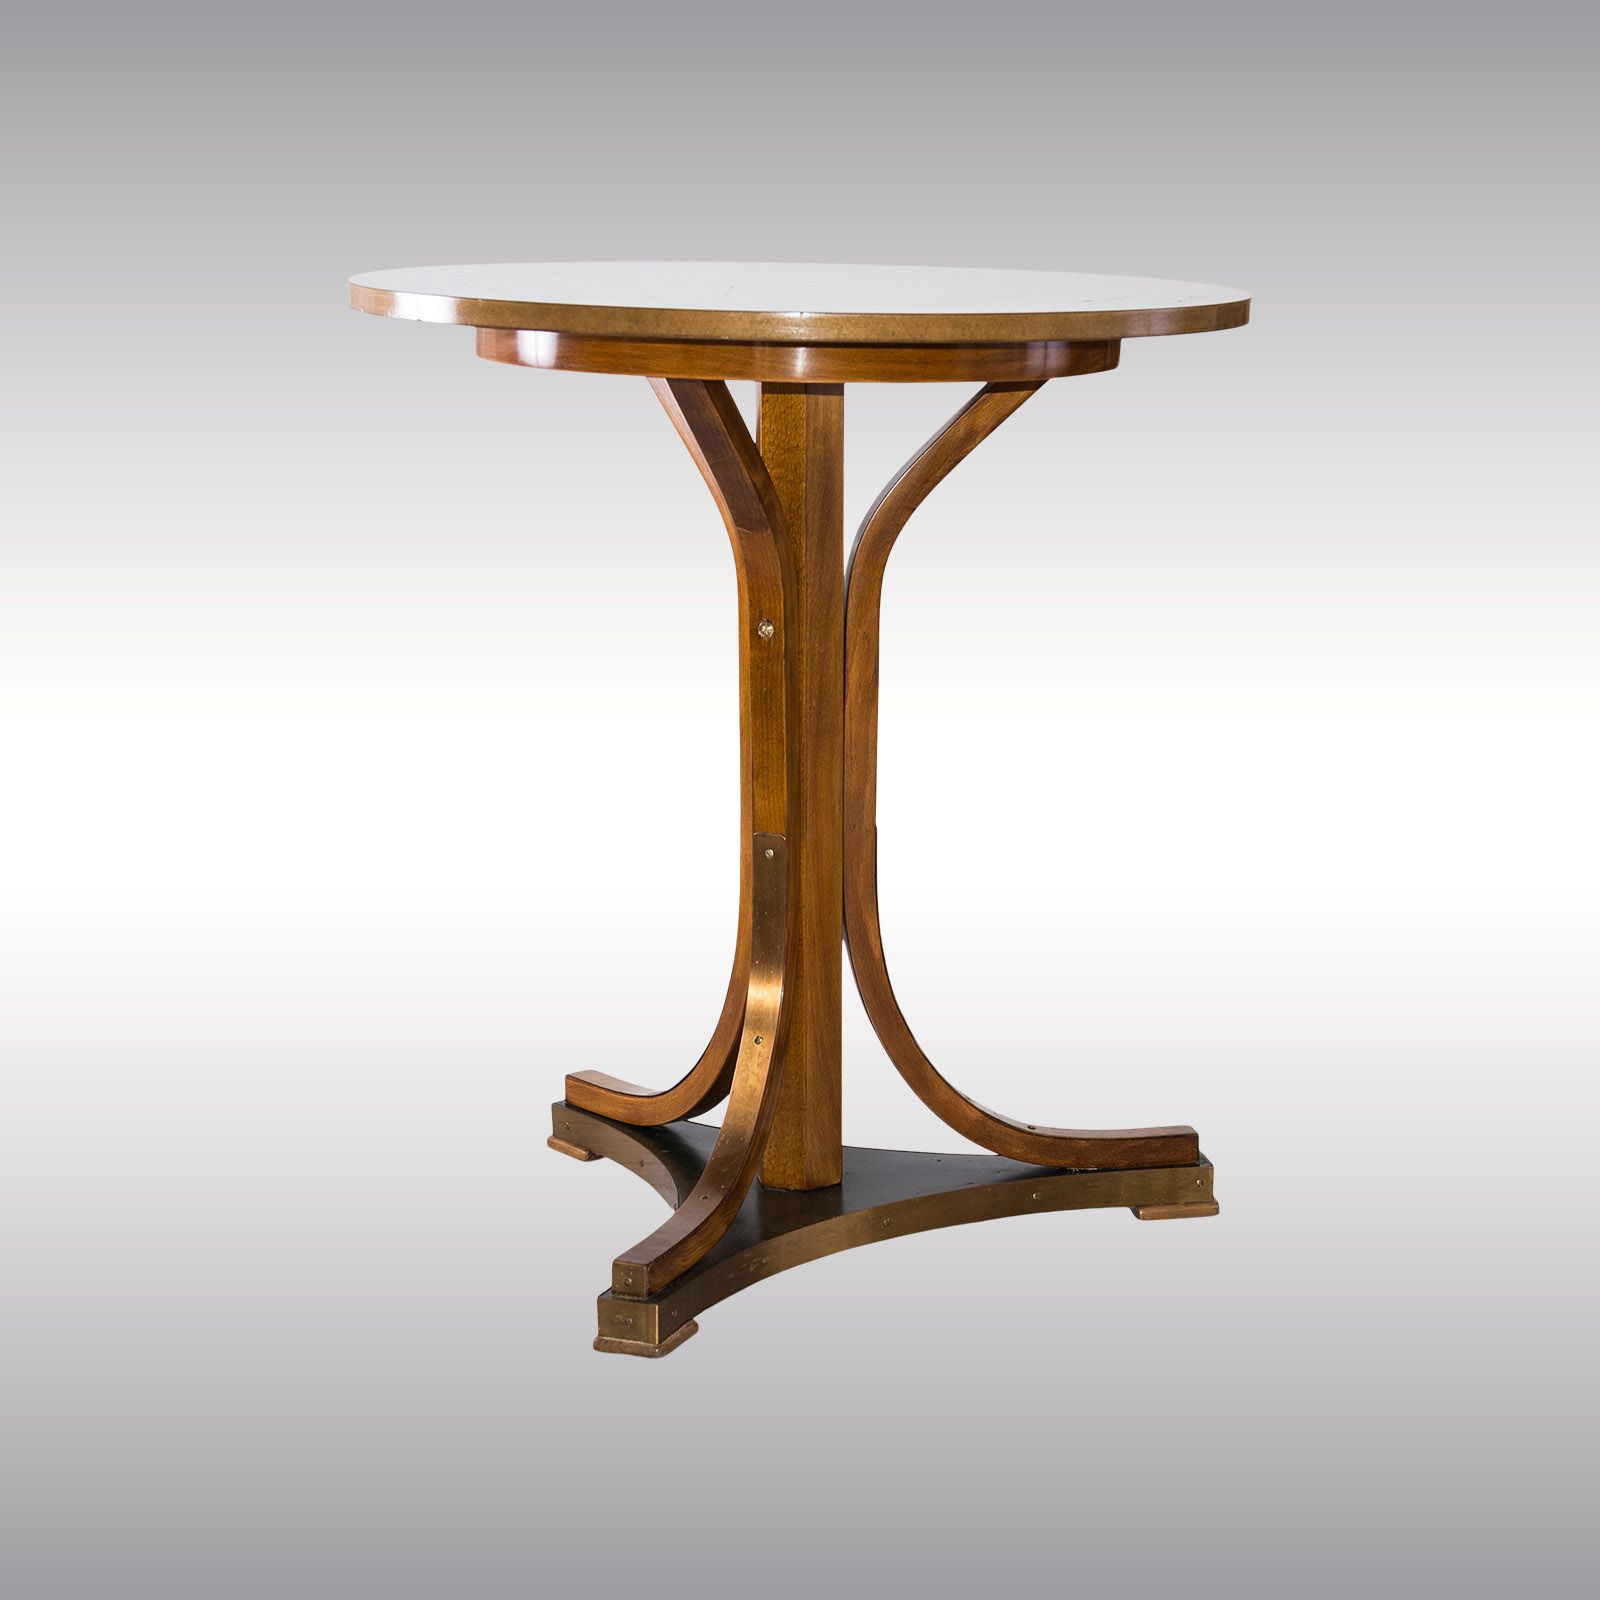 WOKA LAMPS VIENNA - OrderNr.: 50113|Otto Wagner attr. Table Thonet #8050 before 1911 - Design: Otto Wagner